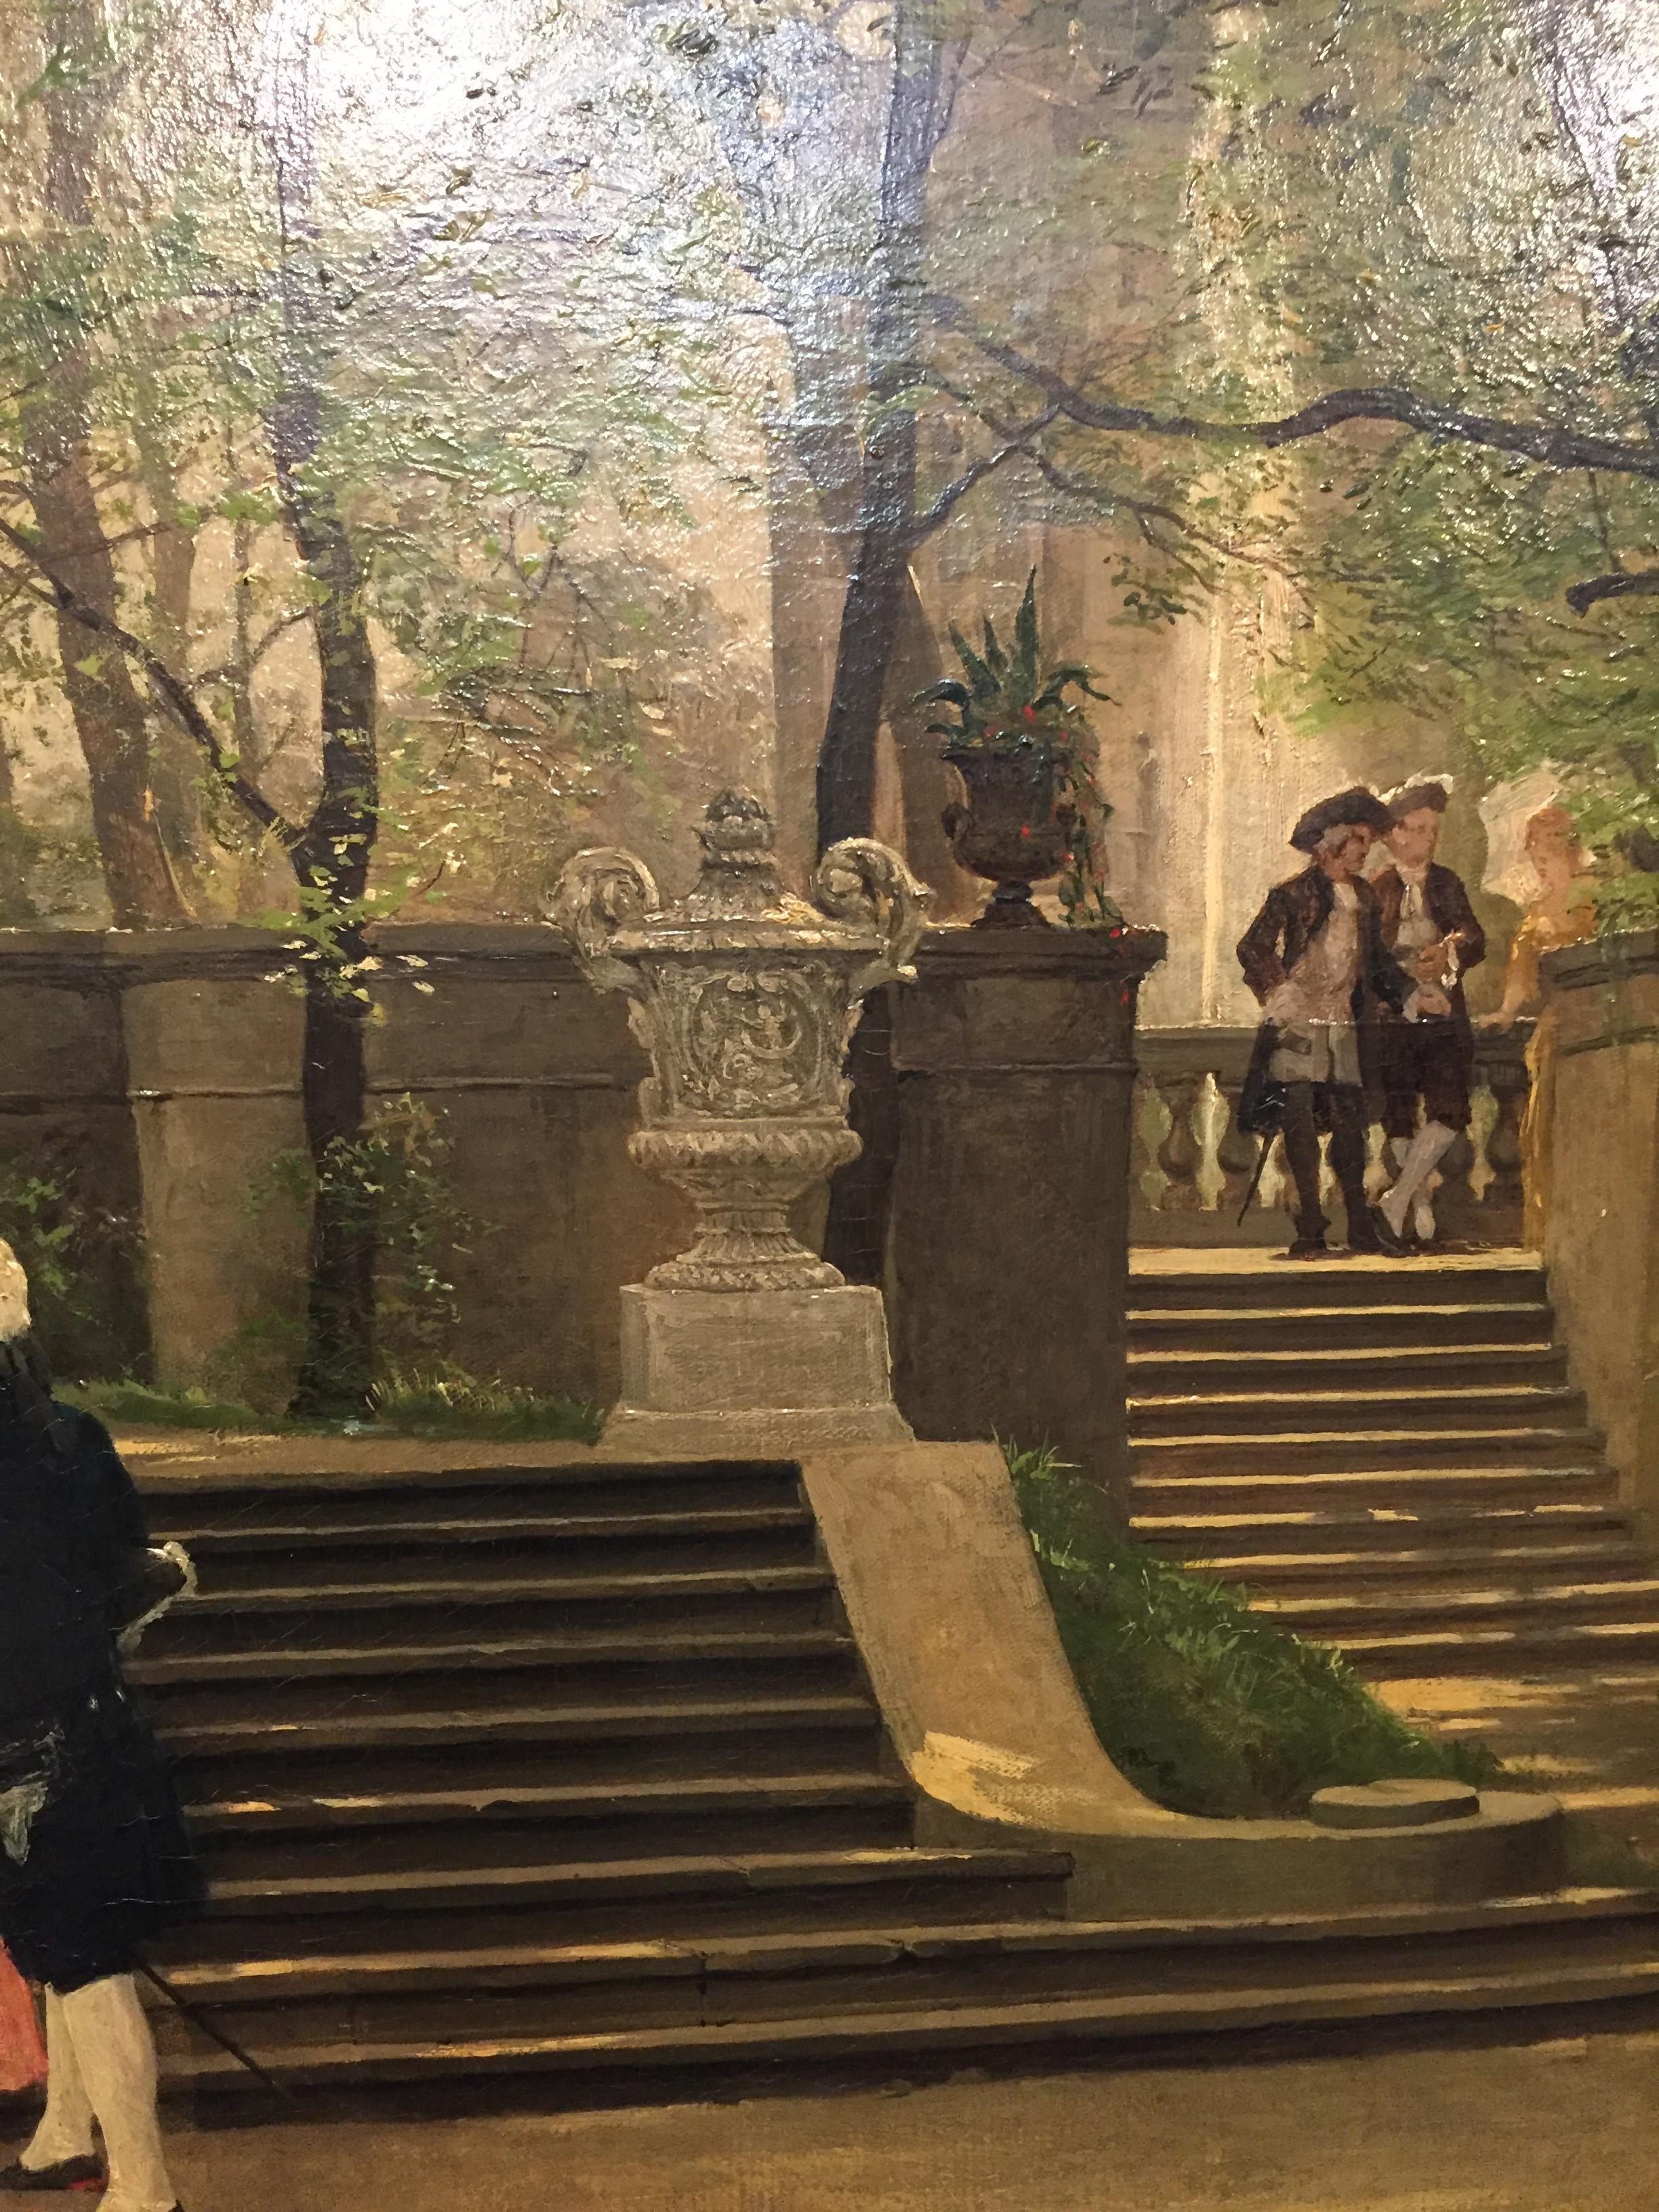 Canvas Oil Painting by P. F. Flickel in the Castle Garden